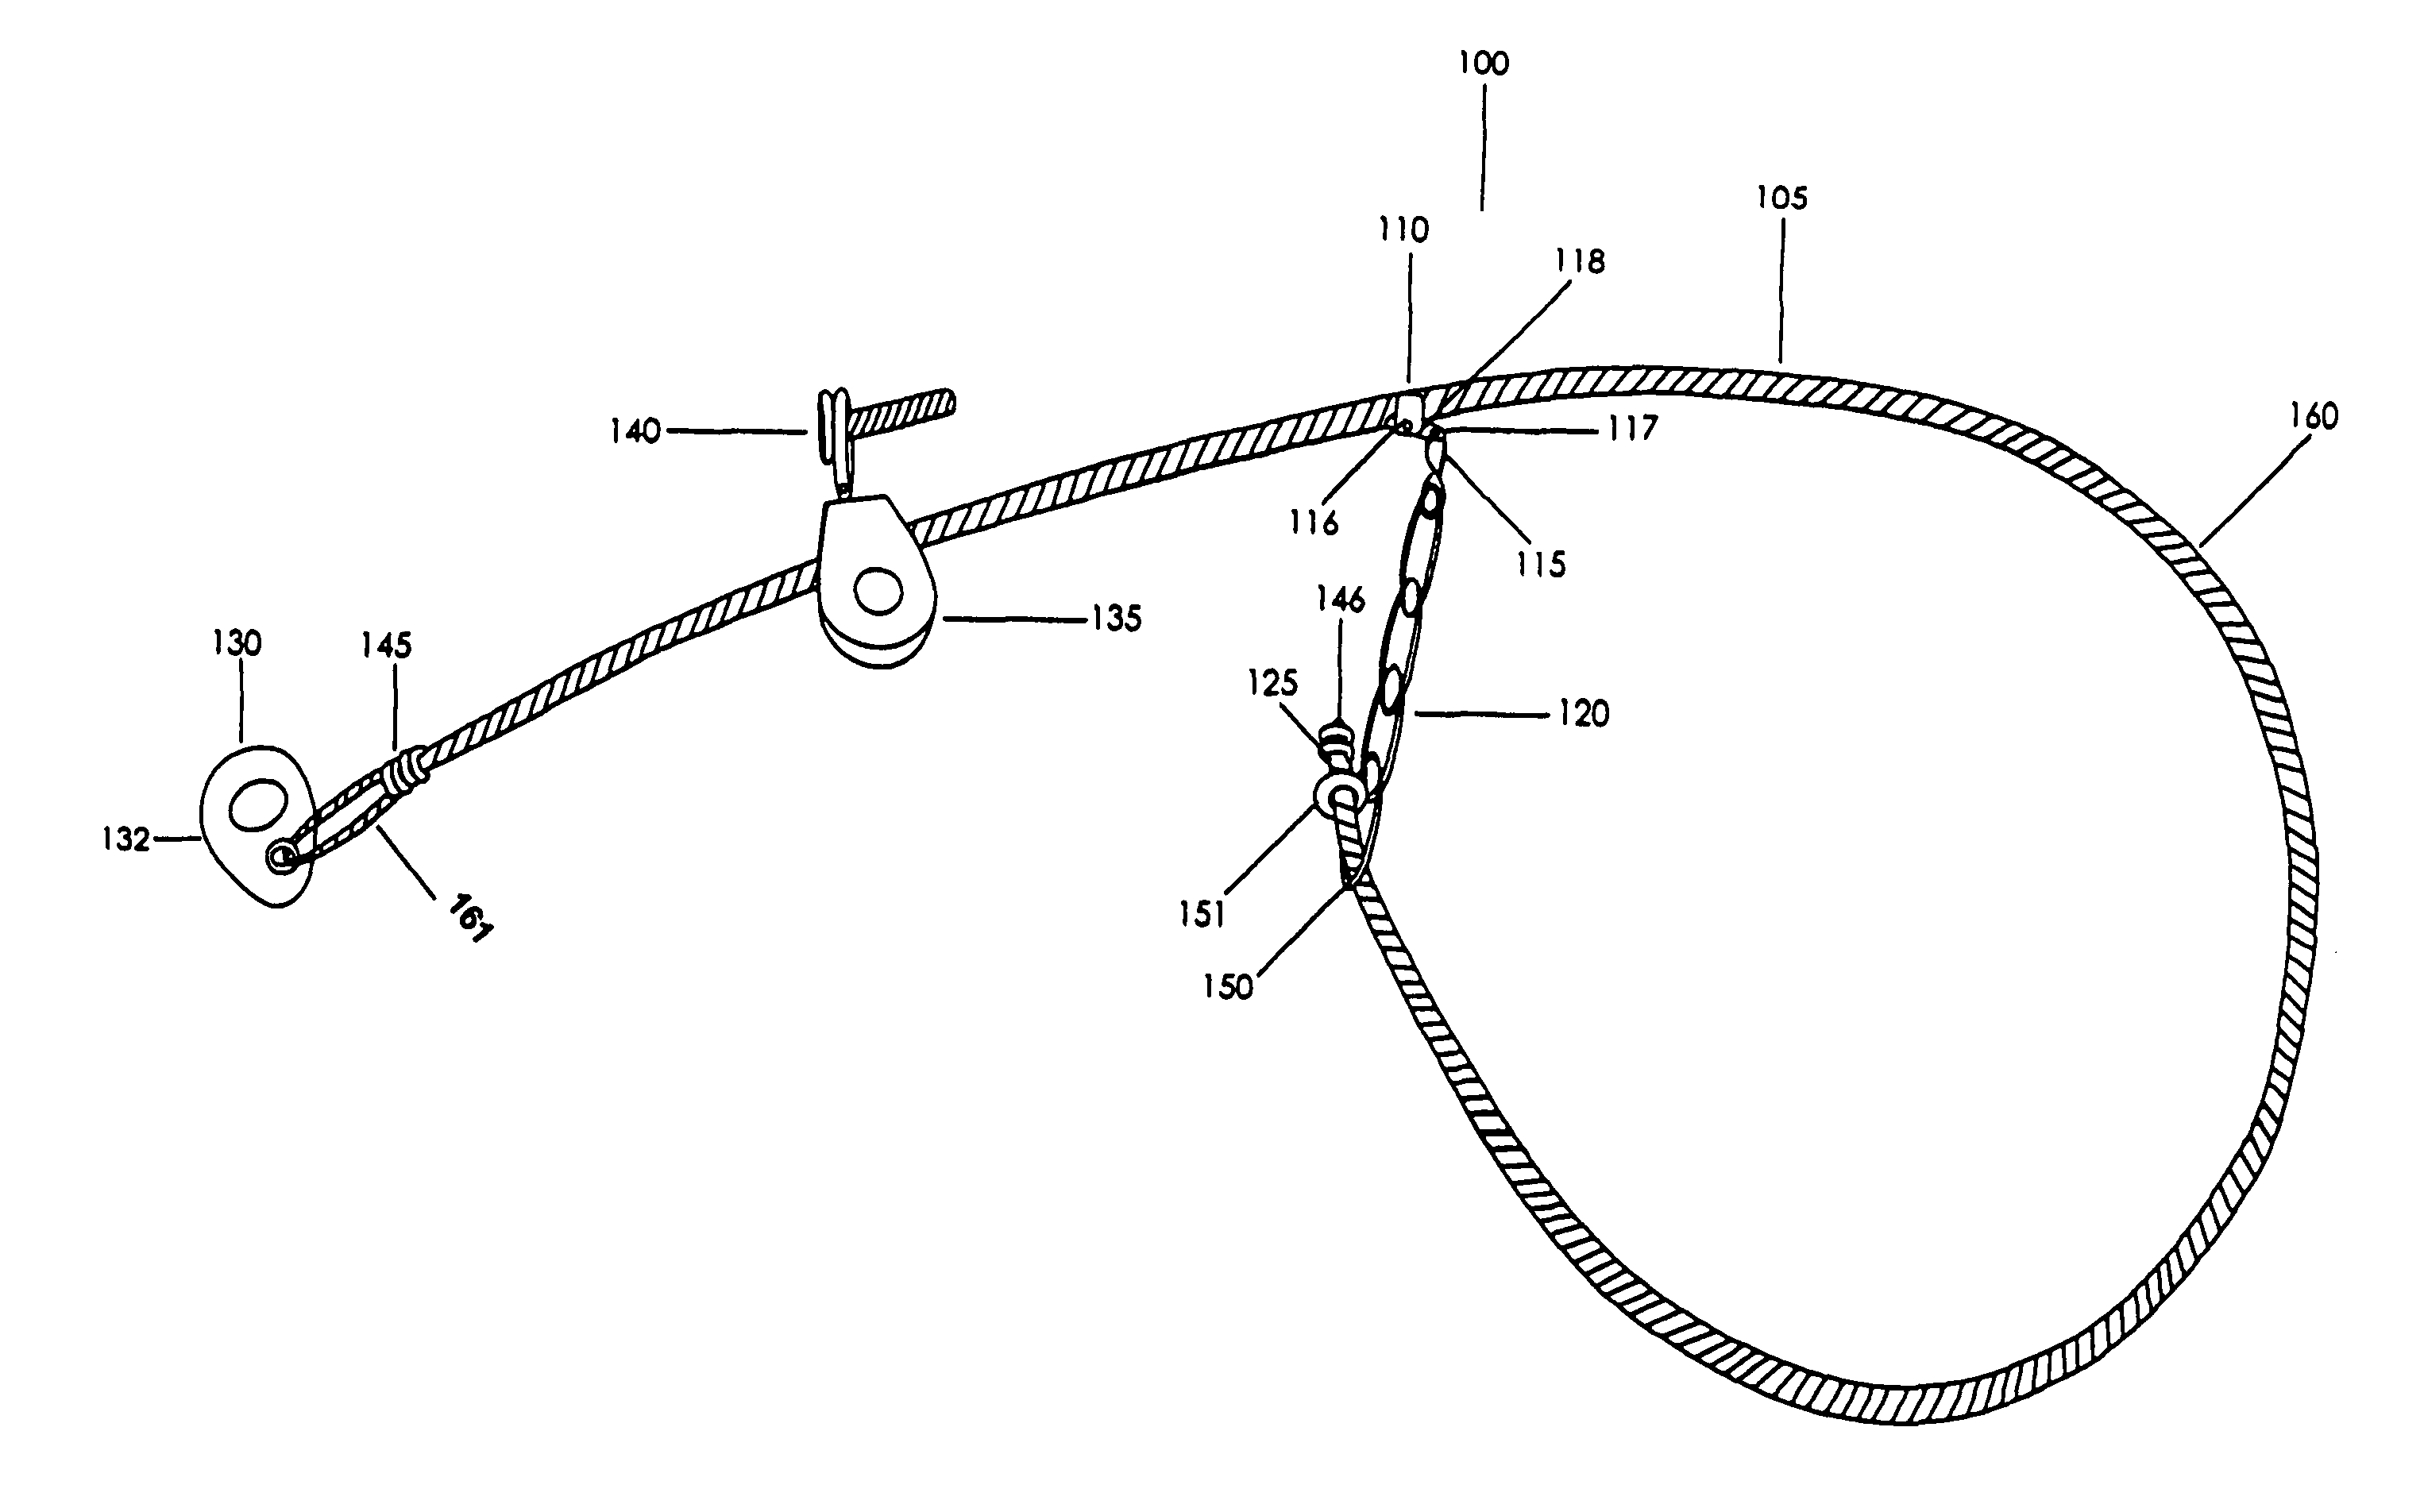 Foot snare device